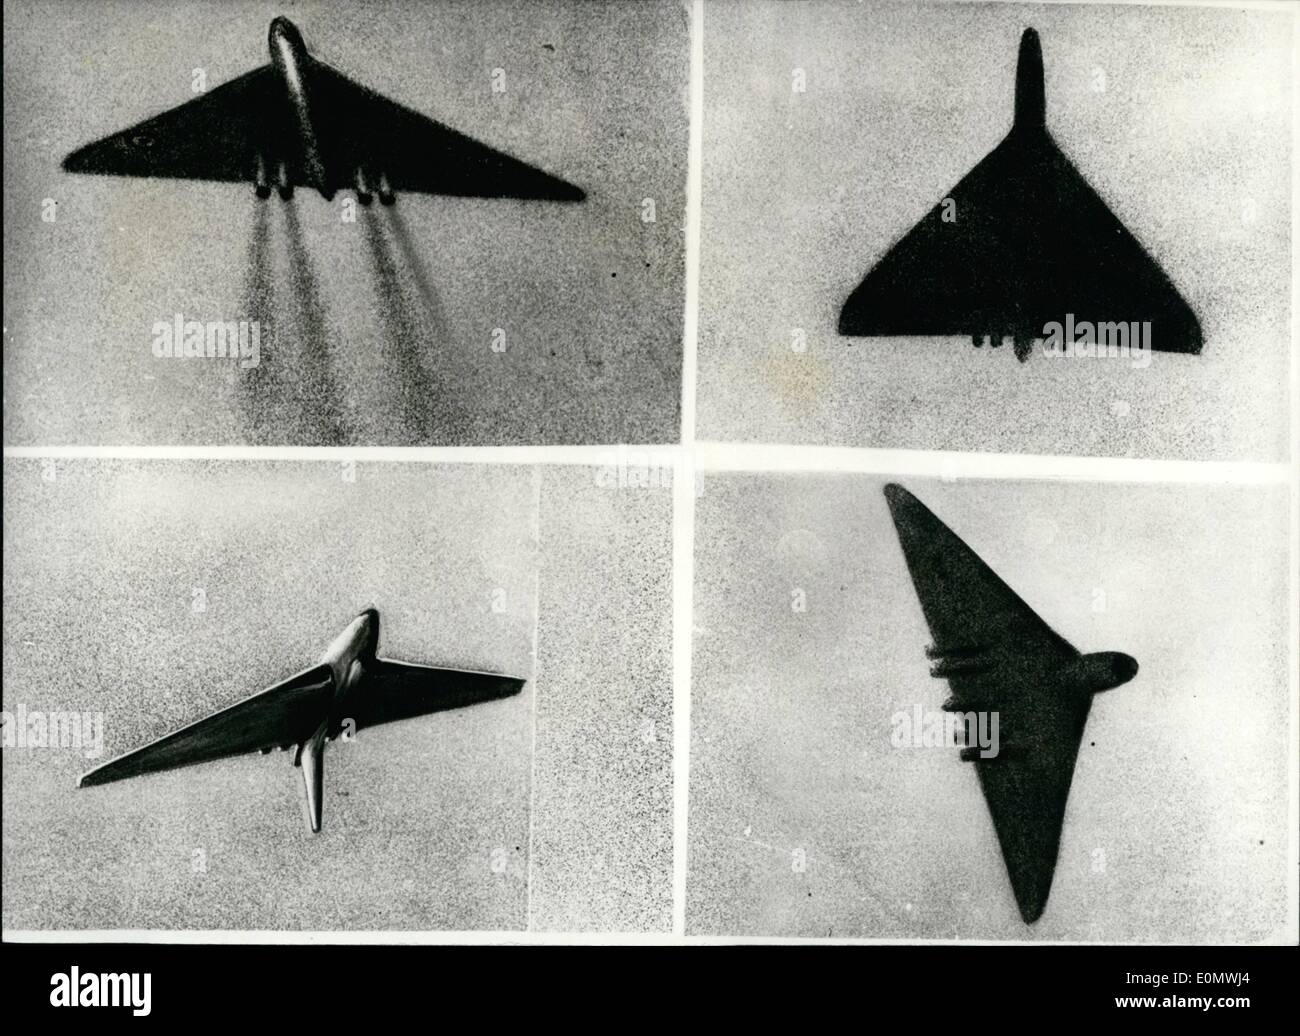 Sep. 09, 1956 - Preview Of Farnborough Air Show Flying Display... Avro Vulcan Loops And Rolls: Four split second pictures - taken by high speed cameras - at an Avro Vulcan 'V' Bomber loops and rolls.. Test pilot Jimmy Harrison takes the 50 ton bomber straight up from his take-off run into the loop. The four jet engines, blasting at full power, give the huge nuclear machine 32 tons of thrust, as seen in Top - left picture - while top right :- the machine goes straight up like a rocket - preparing to turn over at top of the loop - It is just past the point at which it could toss out an 'H' bomb Stock Photo